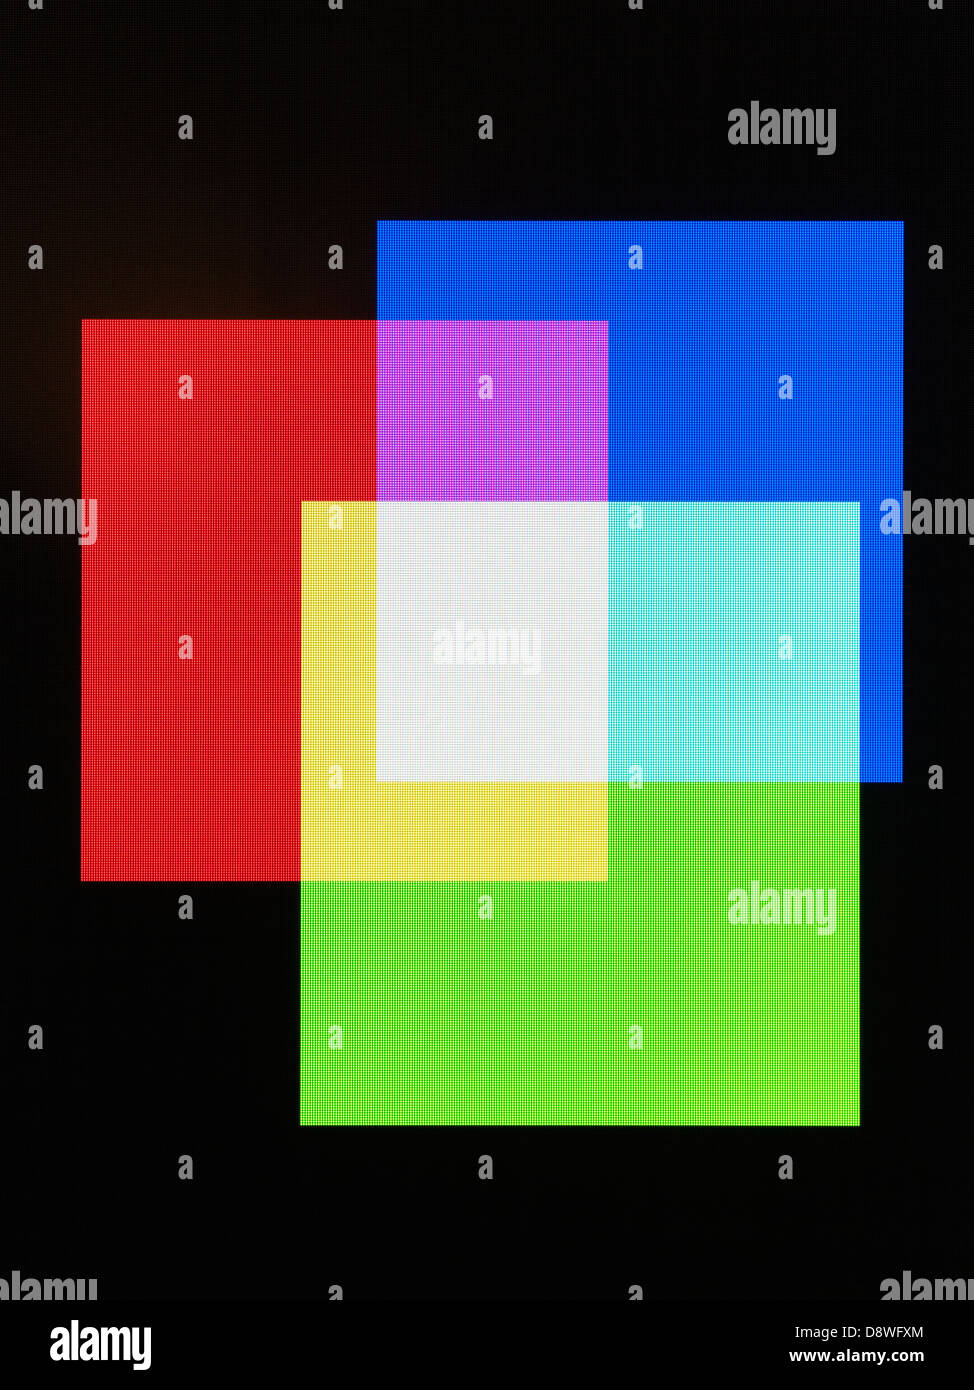 Digital image of colorful squares on computer screen Stock Photo